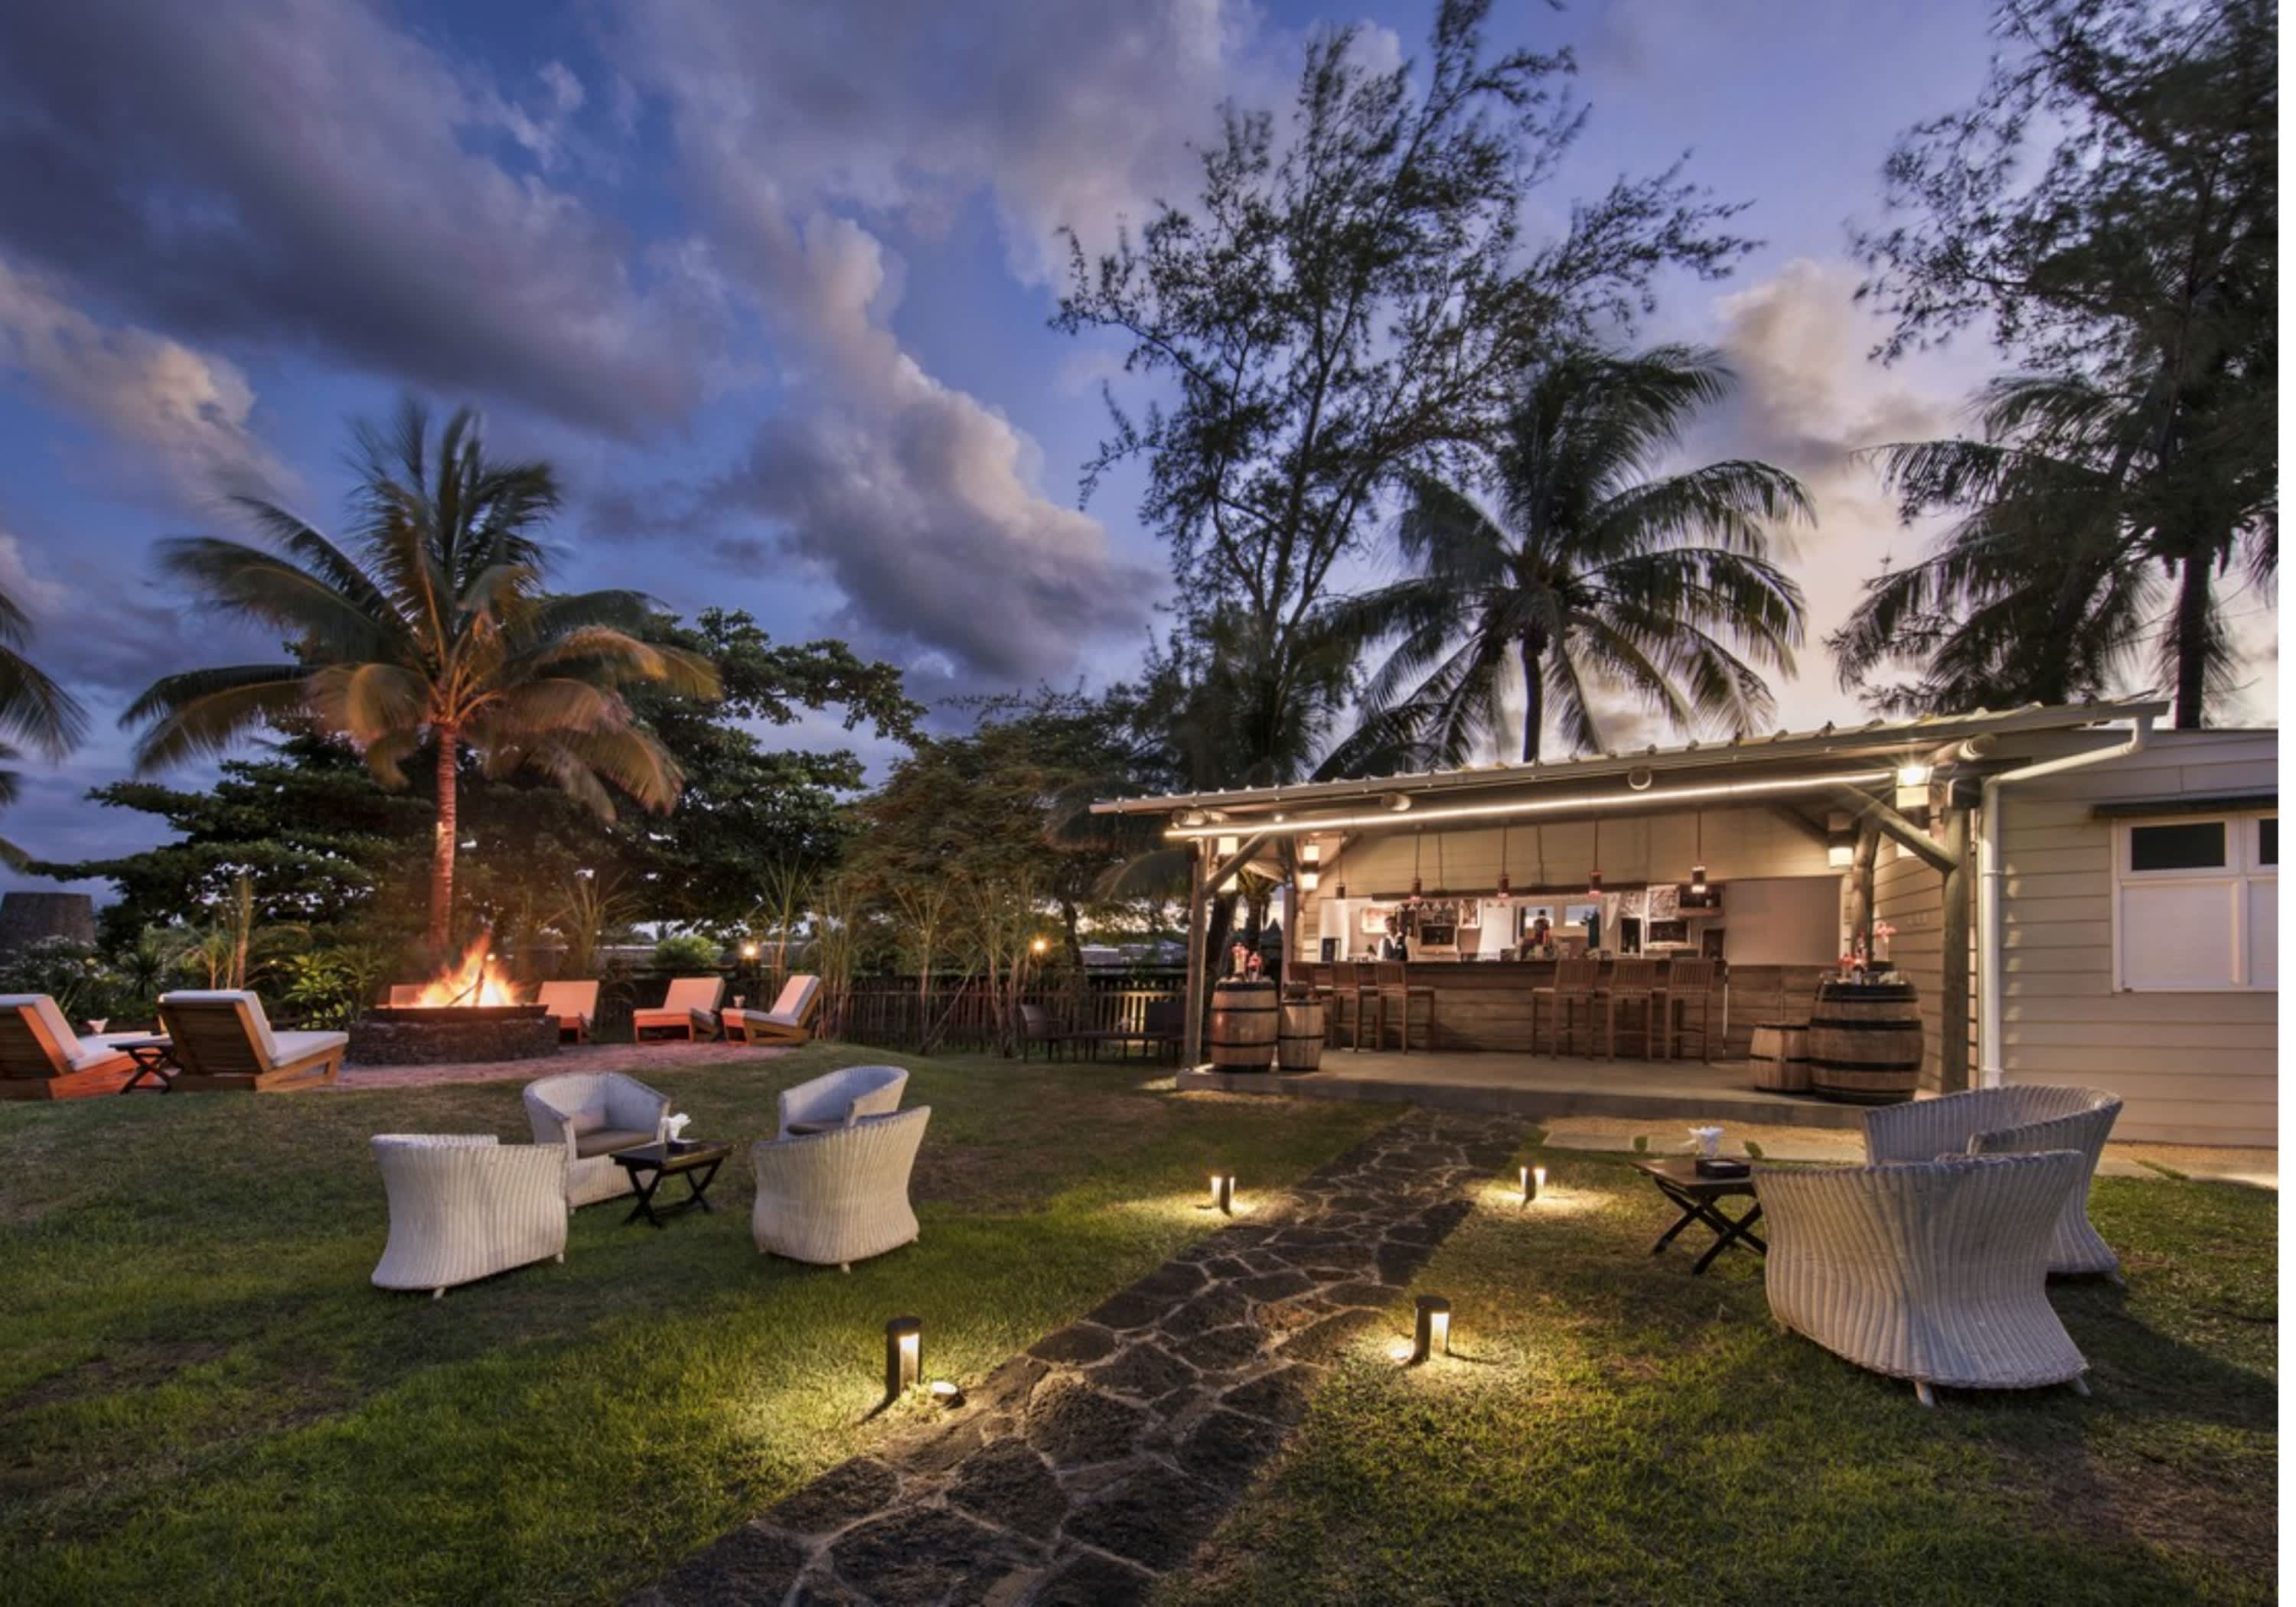 4* Solana Beach Resort, East Coast Mauritius- 7 Nights ADULTS ONLY Stay & Breakfast + Dinner & Flights from R25 800 pps!